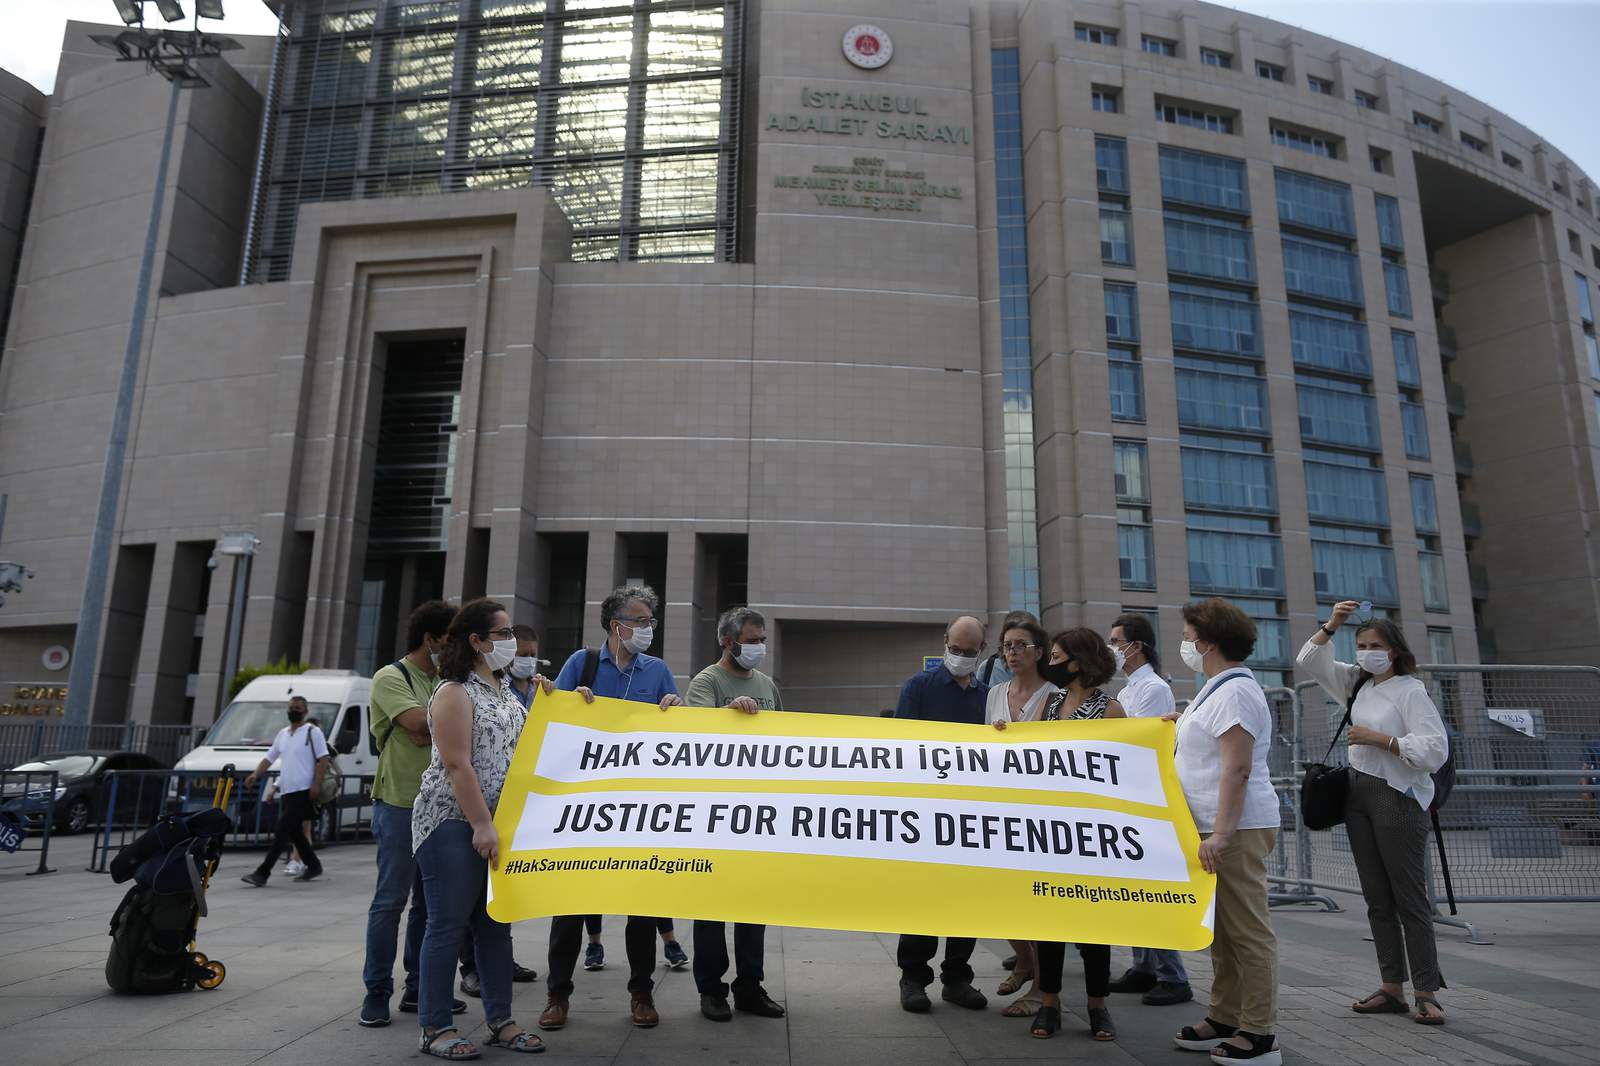 Turkey convicts 4 human rights activists of terror charges